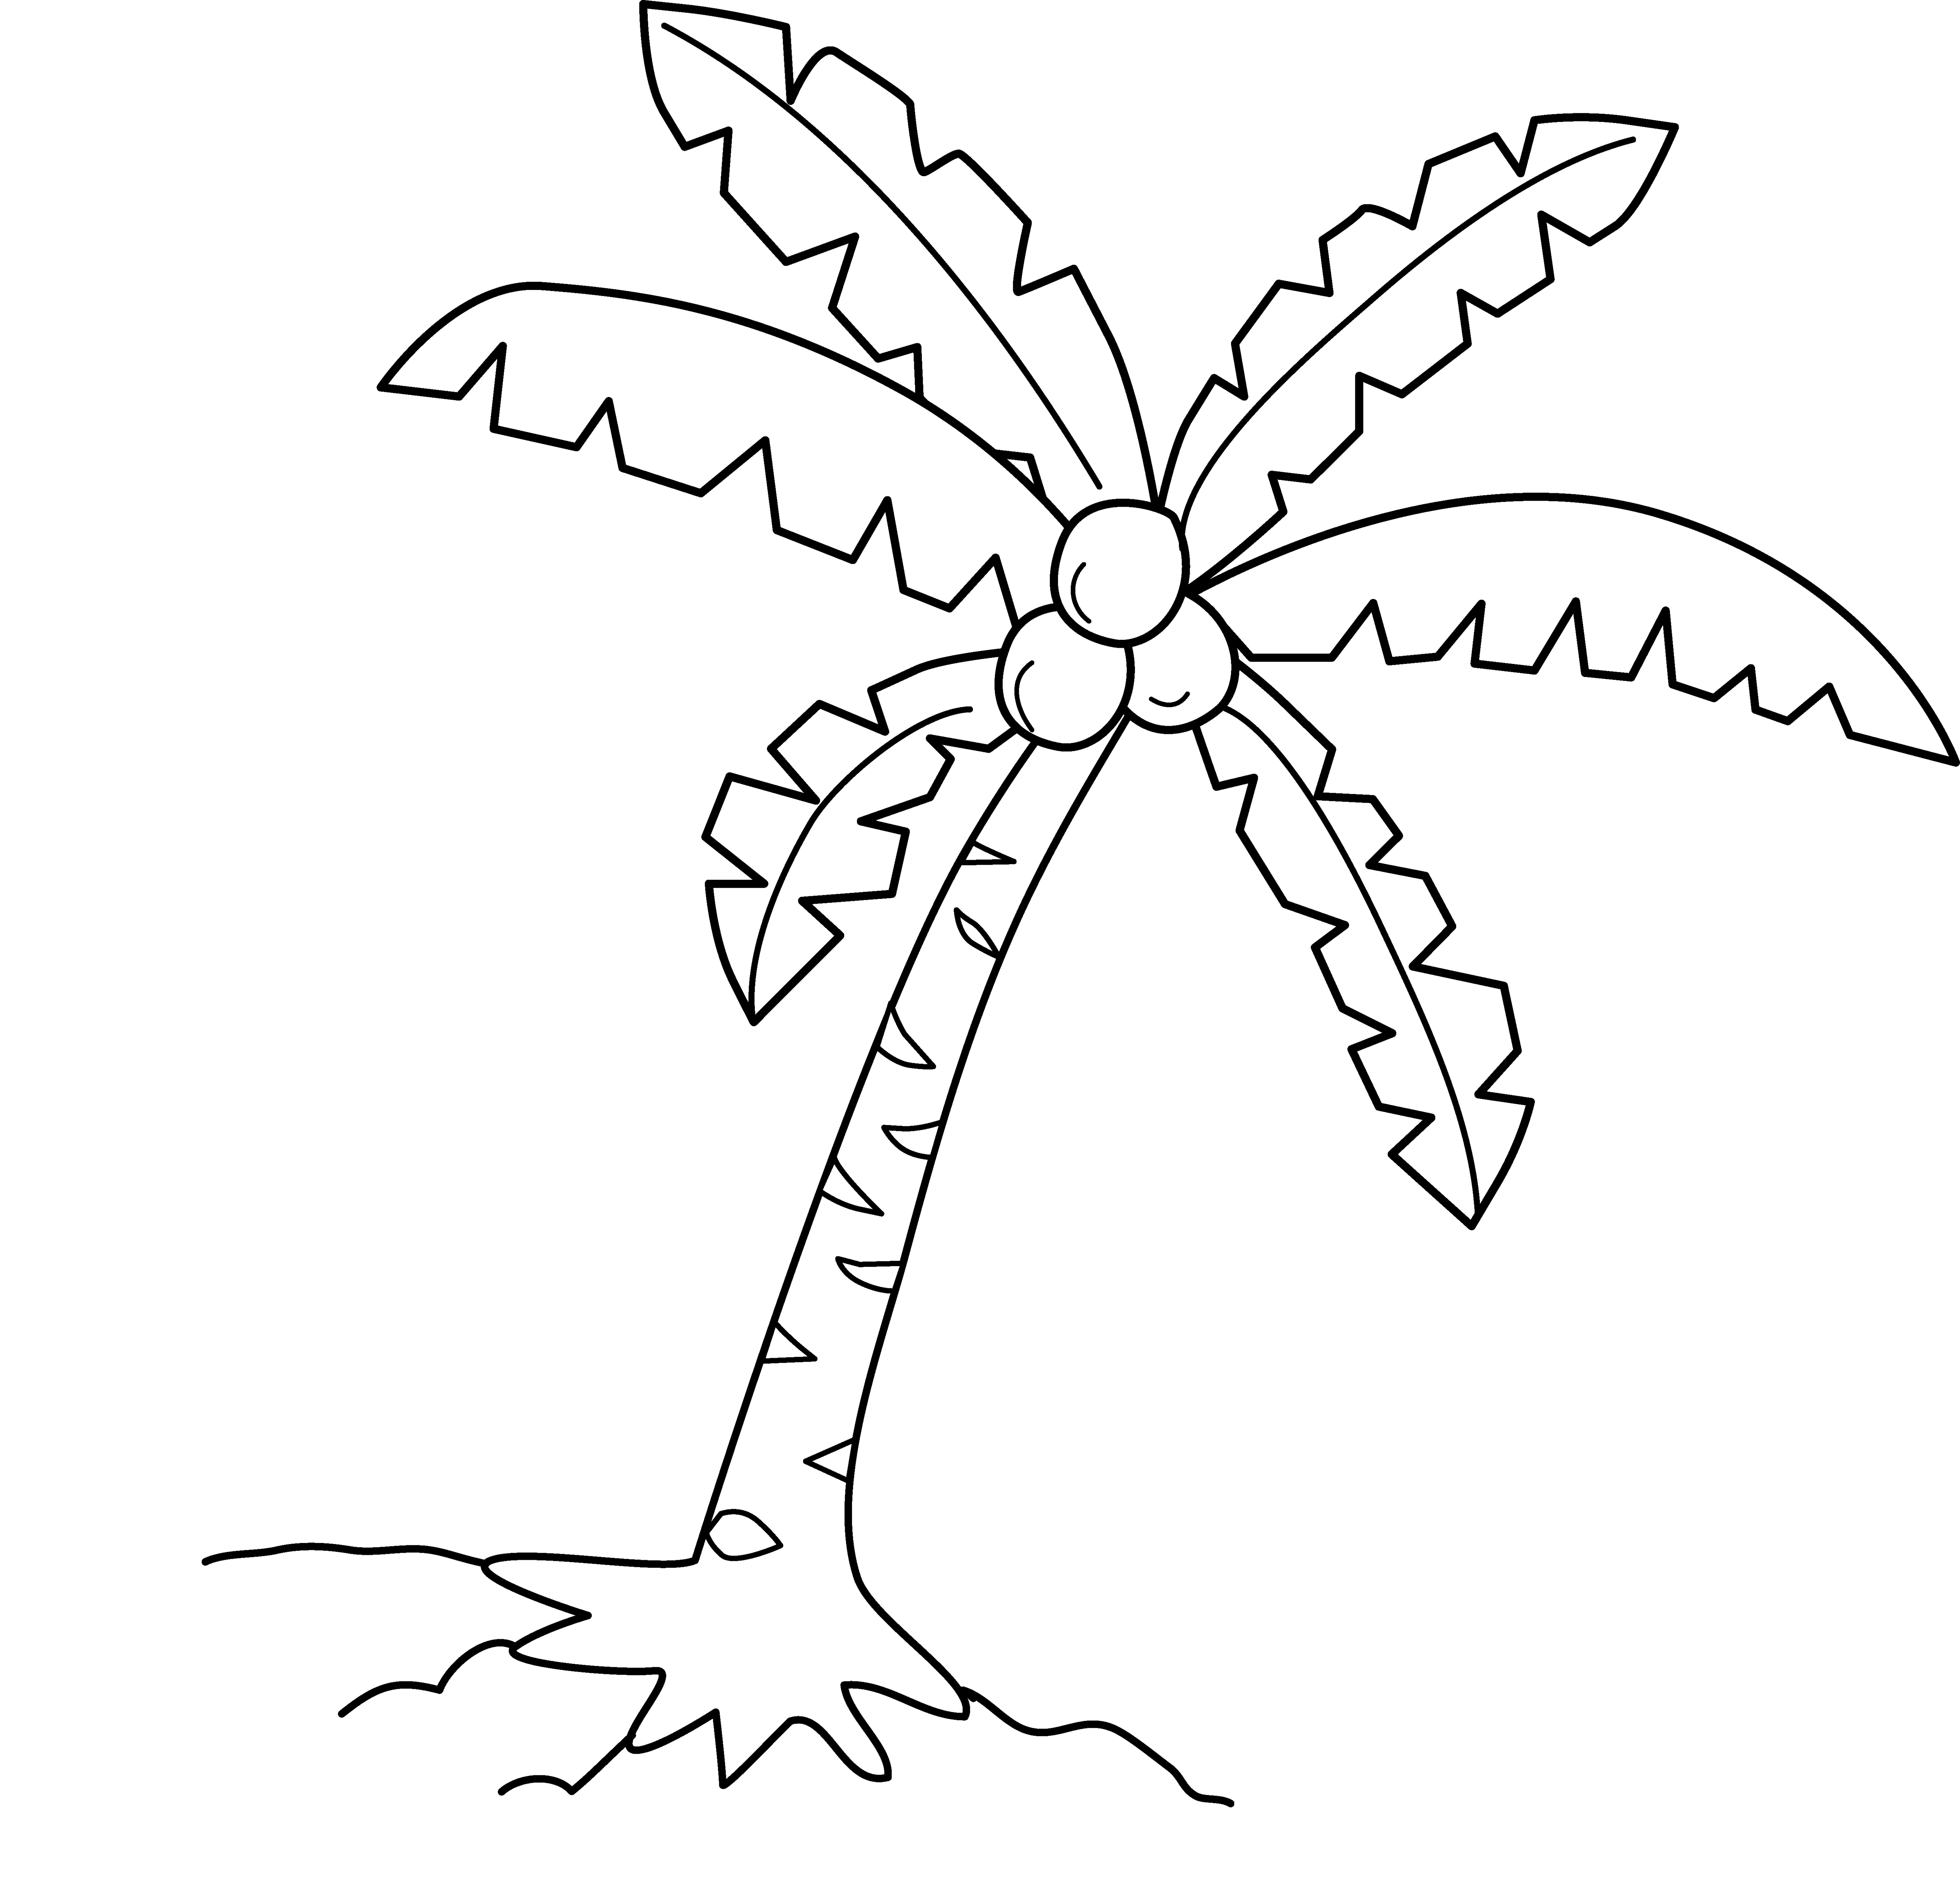 Tree drawing at getdrawings. Coconut clipart drawn